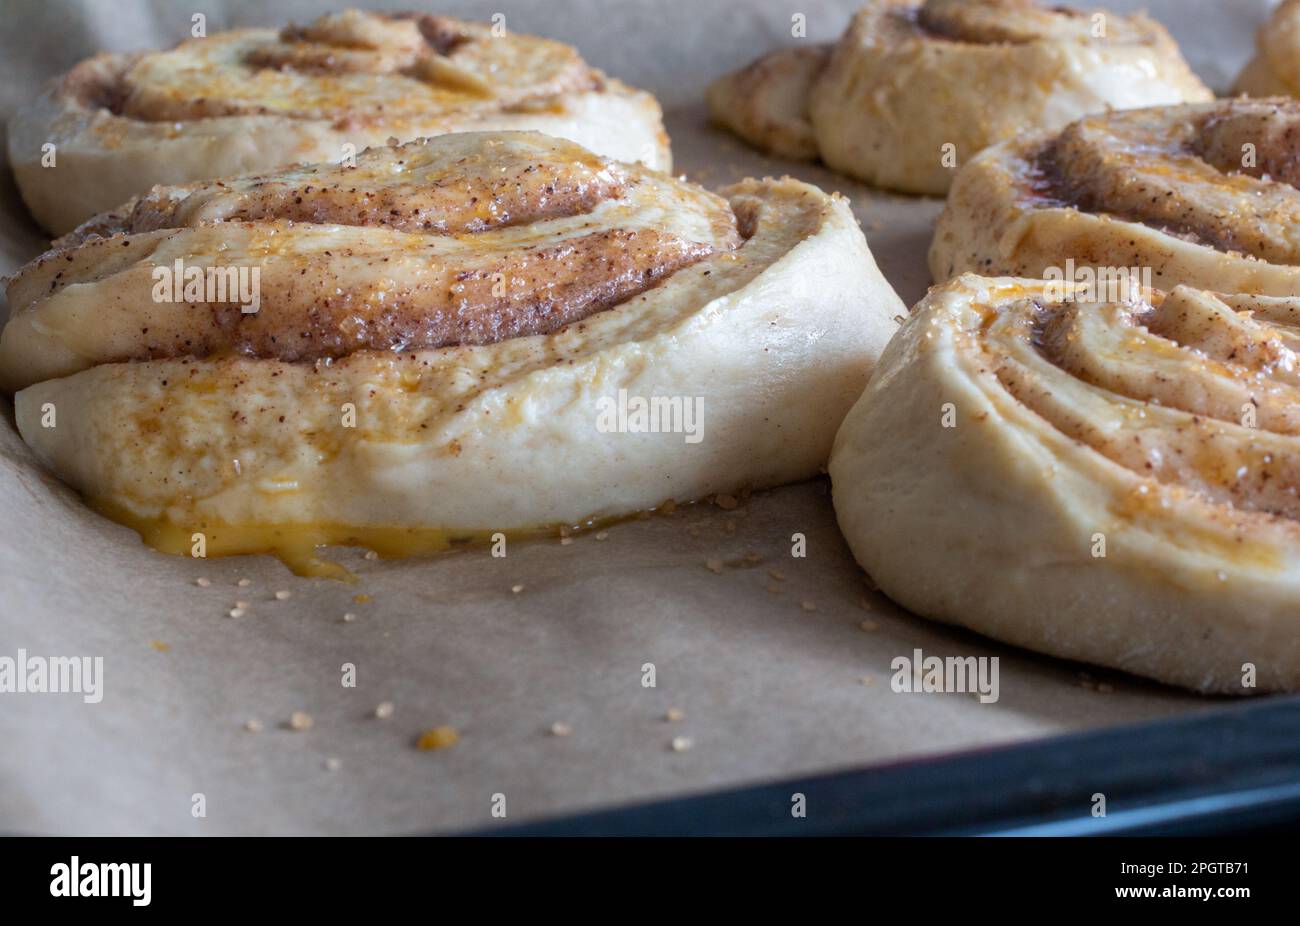 uncooked cinnamon buns decorated with granulated sugar Stock Photo